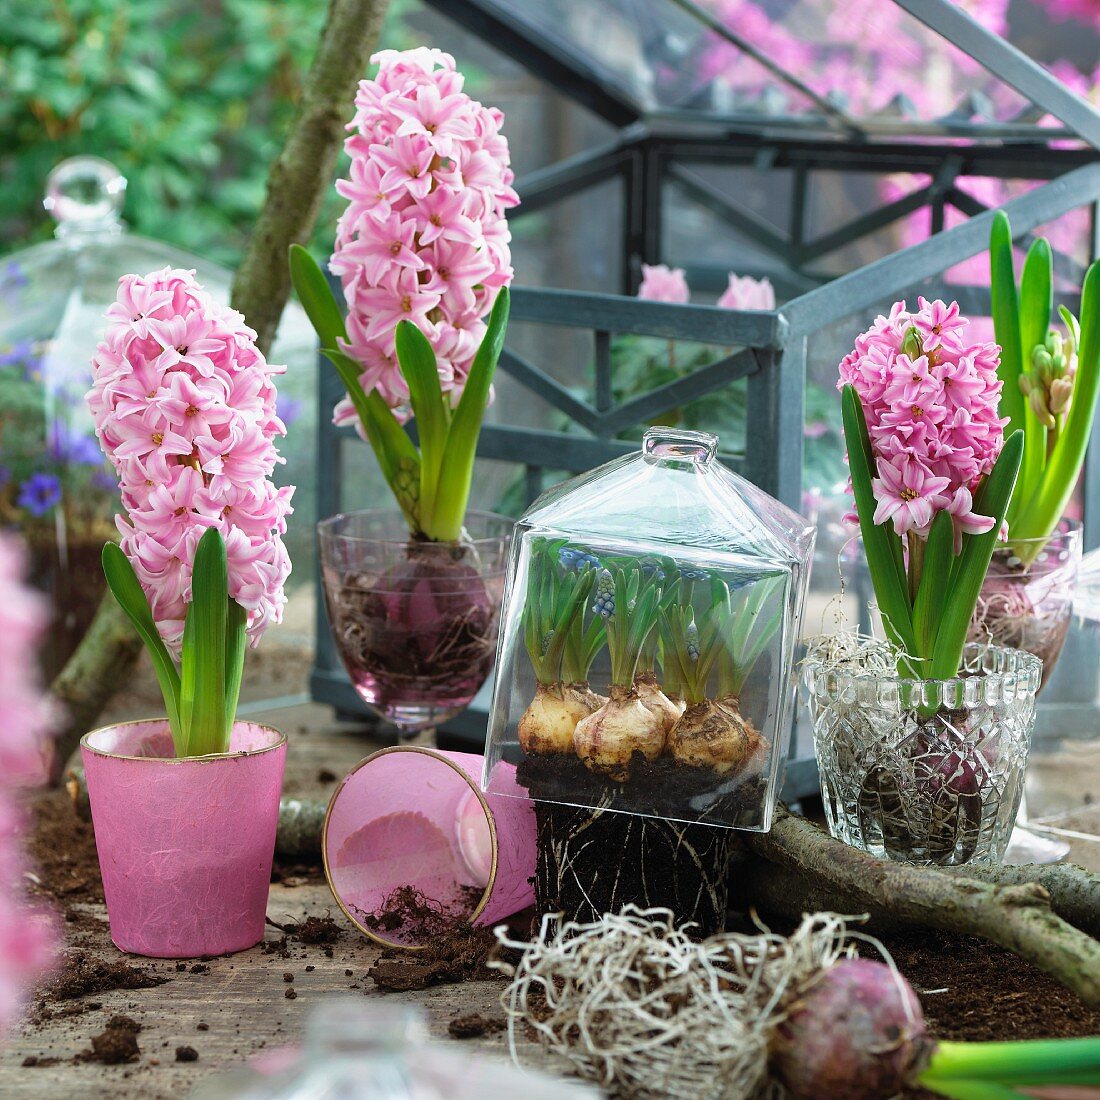 Pink hyacinths in glass pots and under a glass cloche